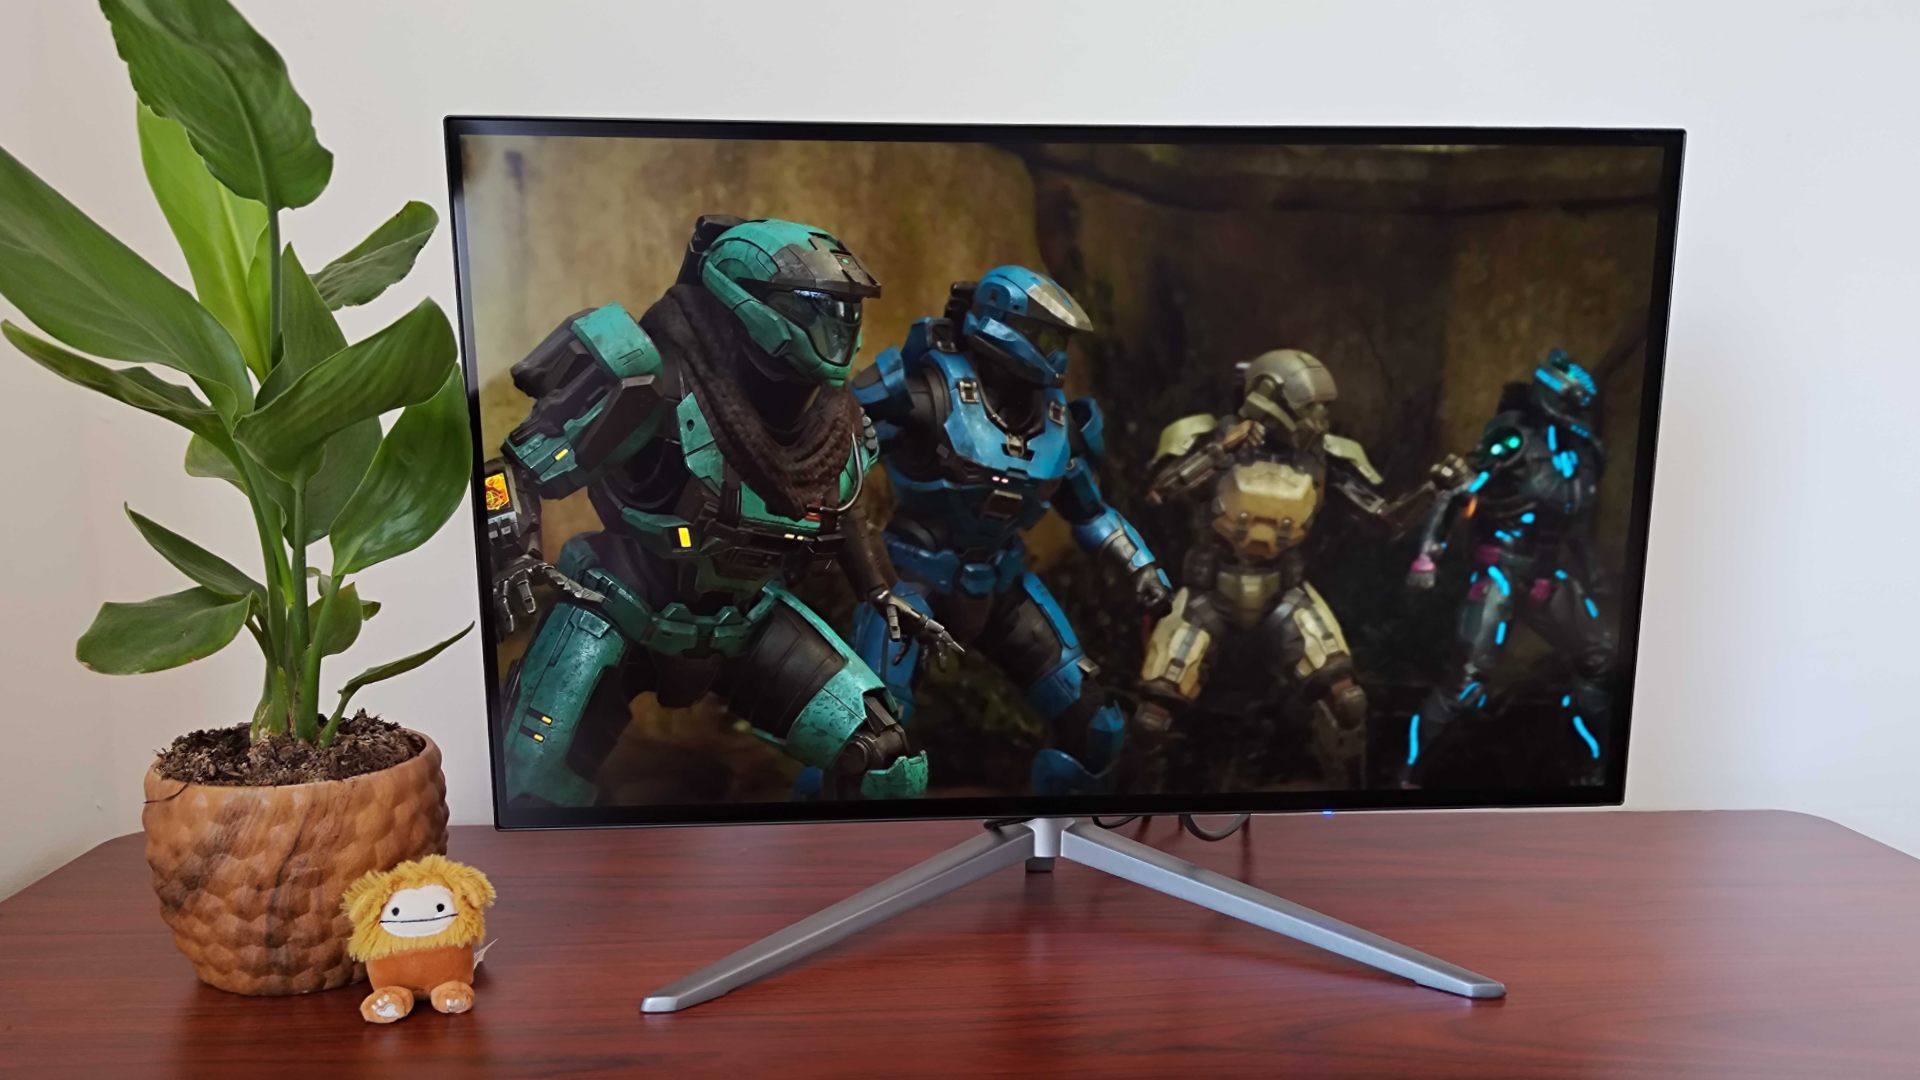 KTC G27P6 with Halo Infinite multiplayer intro of four player Spartans on screen